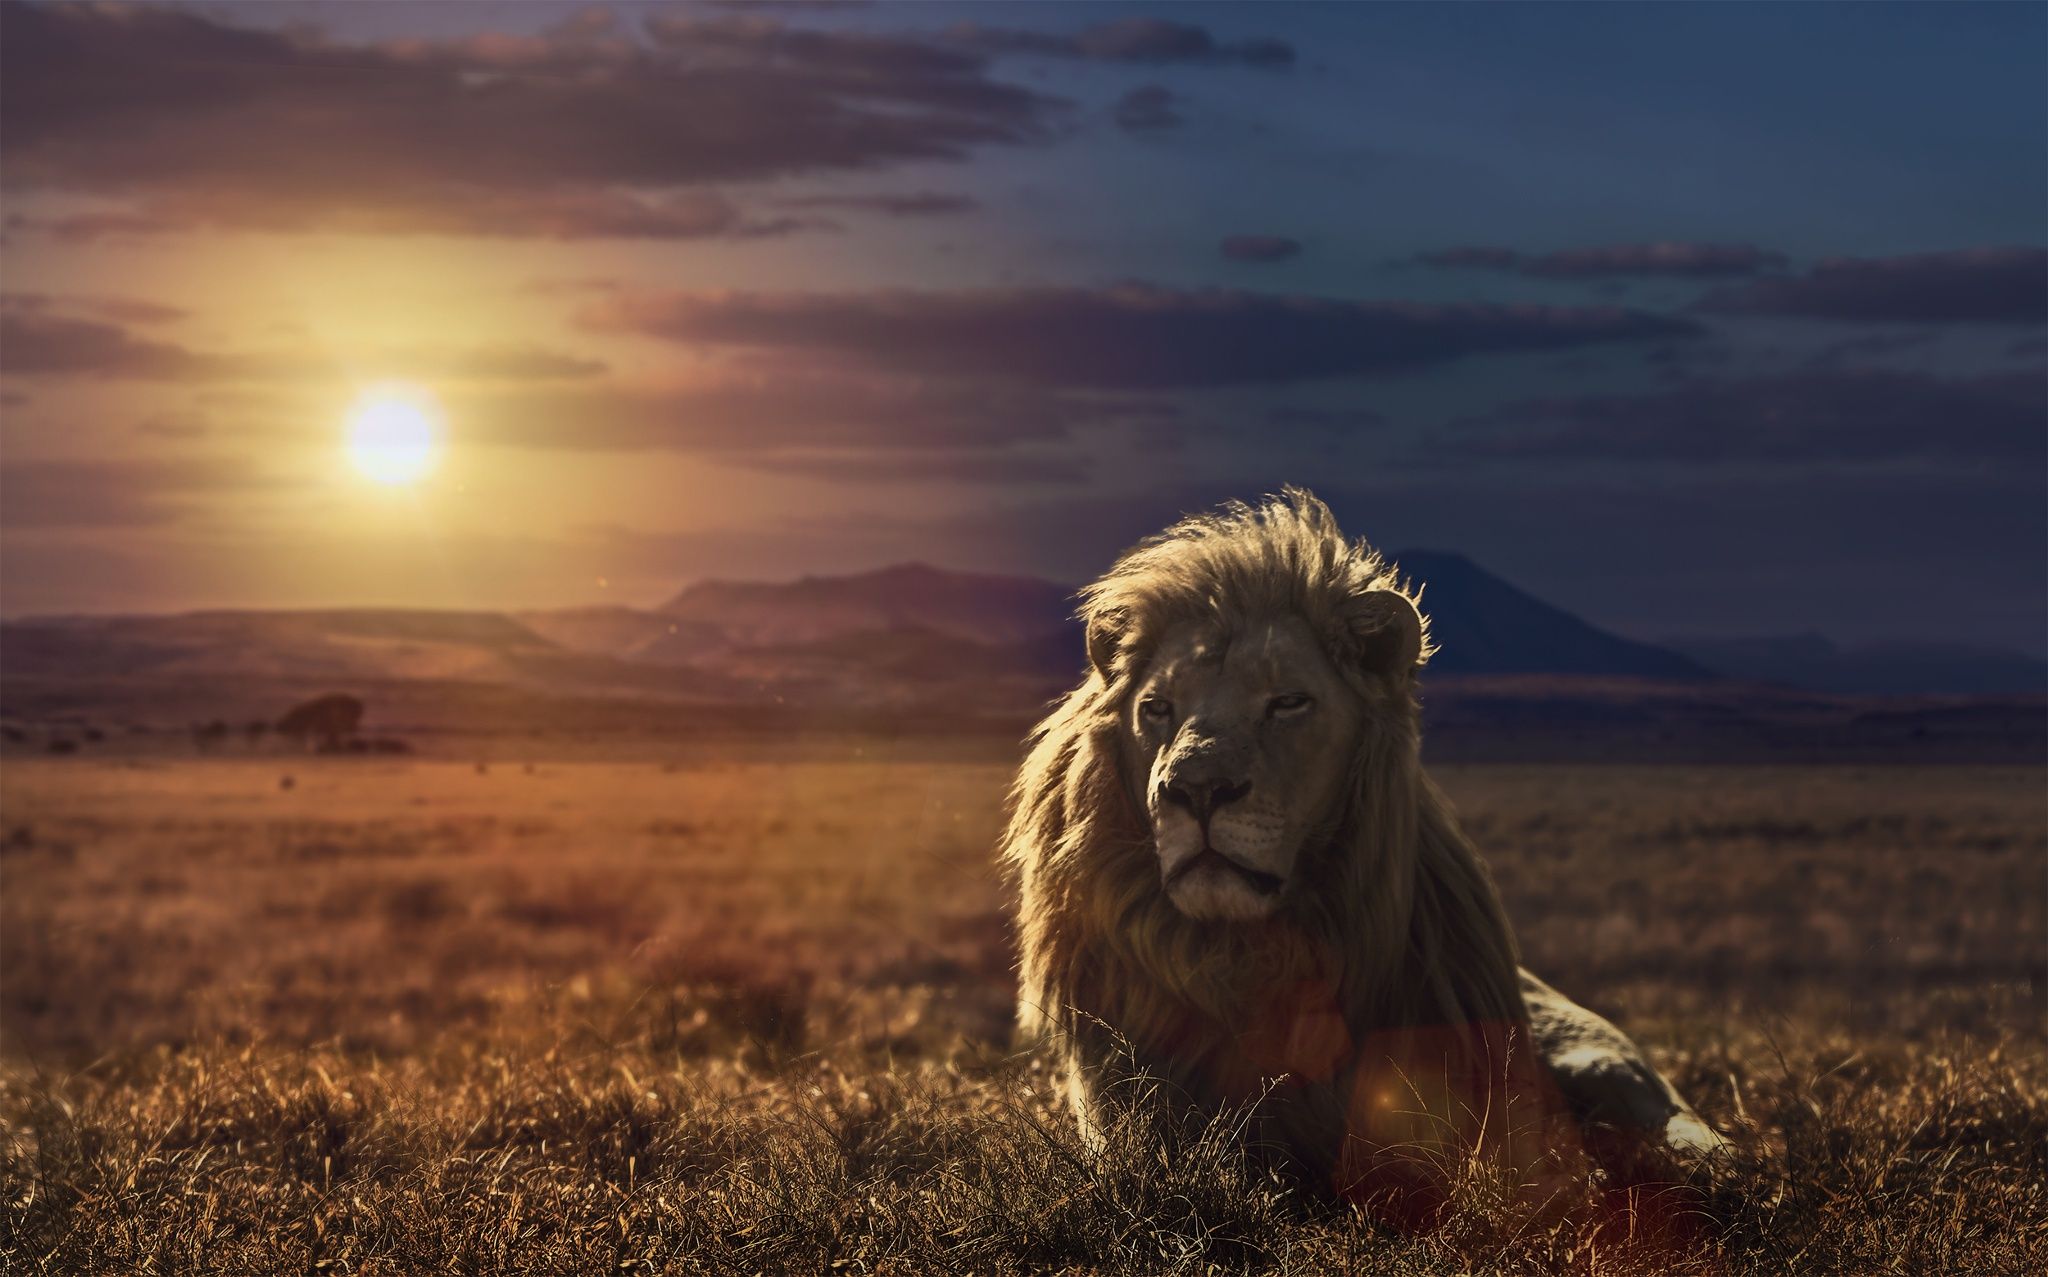 lion hd wallpaper for android